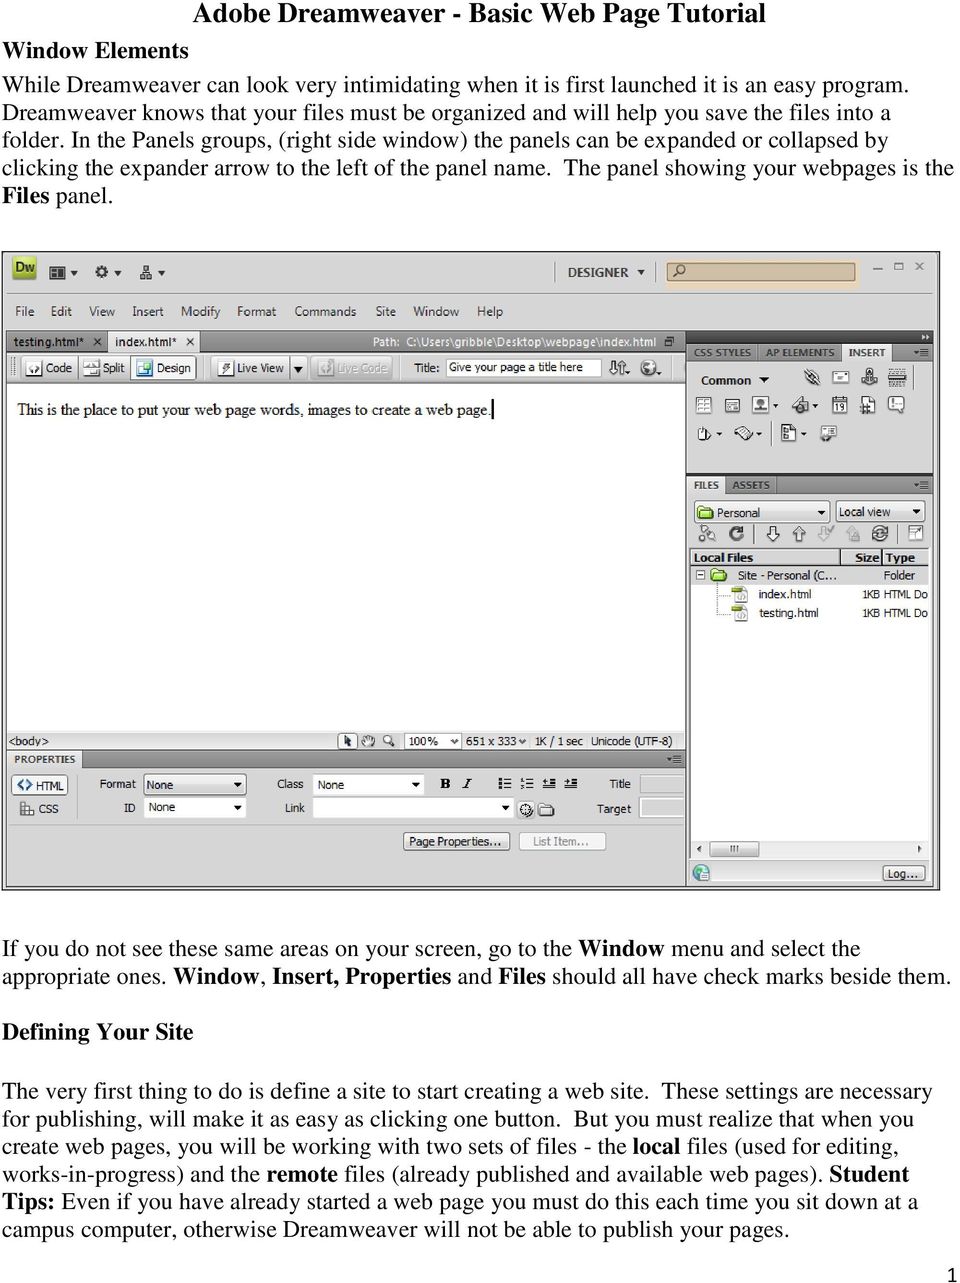 In the Panels groups, (right side window) the panels can be expanded or collapsed by clicking the expander arrow to the left of the panel name. The panel showing your webpages is the Files panel.